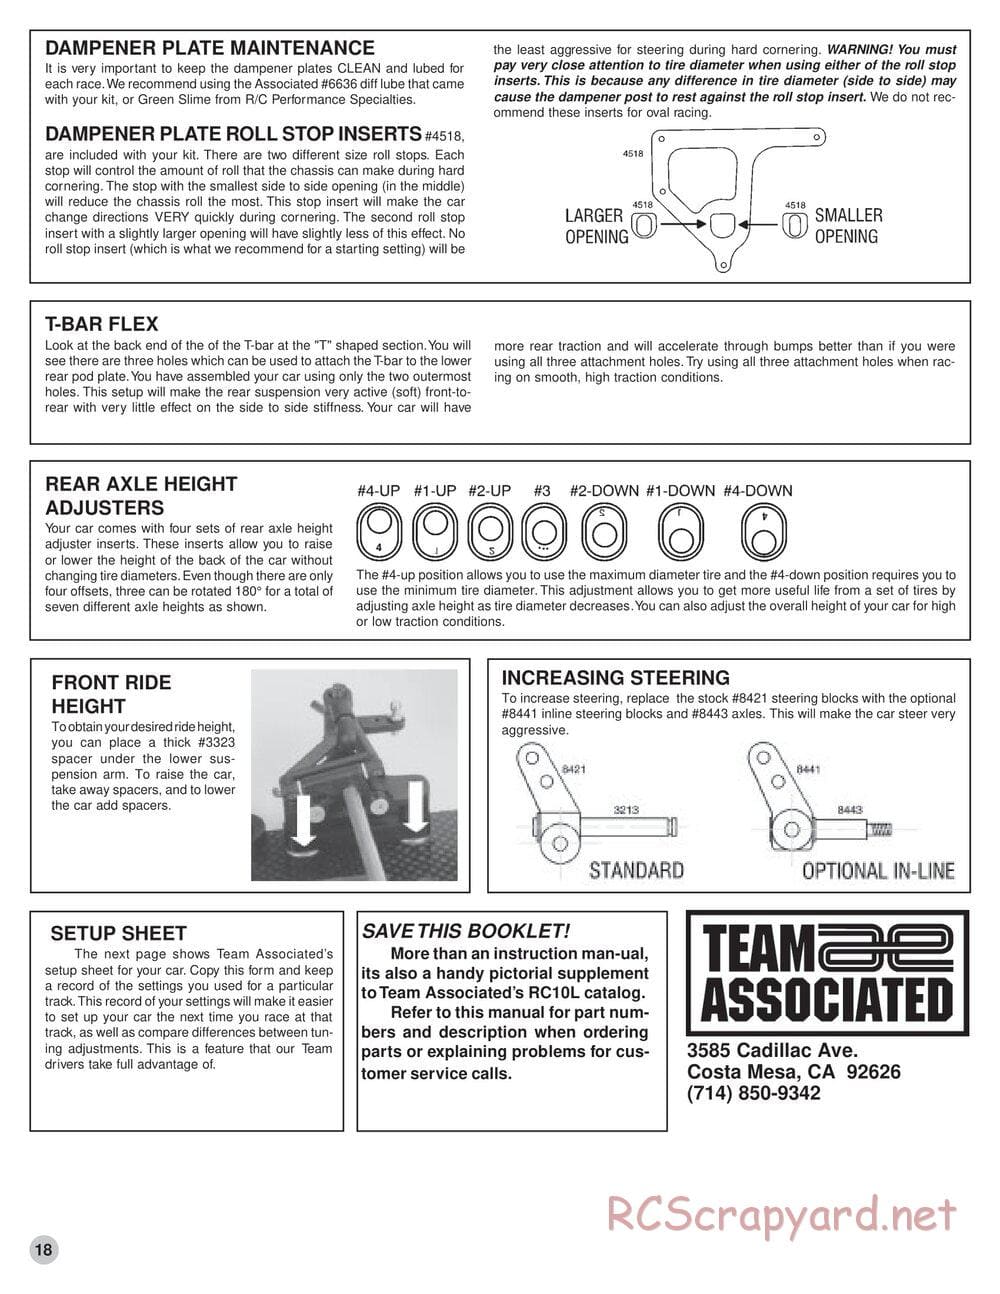 Team Associated - RC10L2 - Manual - Page 17